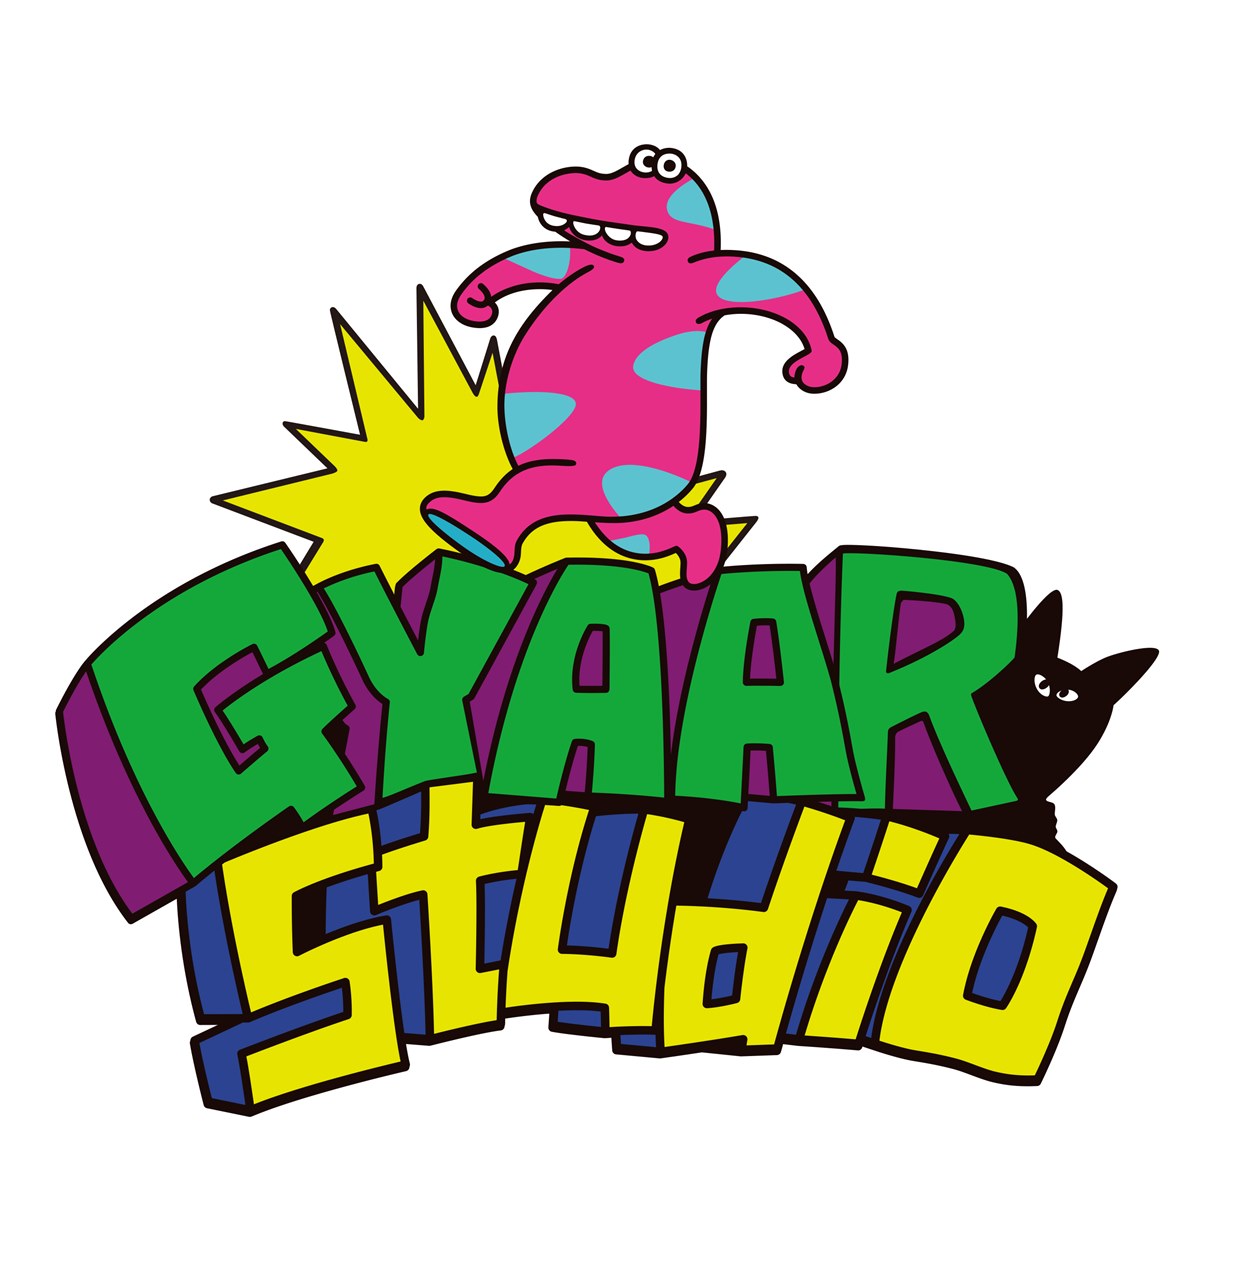 Bandai Namco’s indie game label GYAAR Studio announced. Survival Quiz CITY will be their debut title